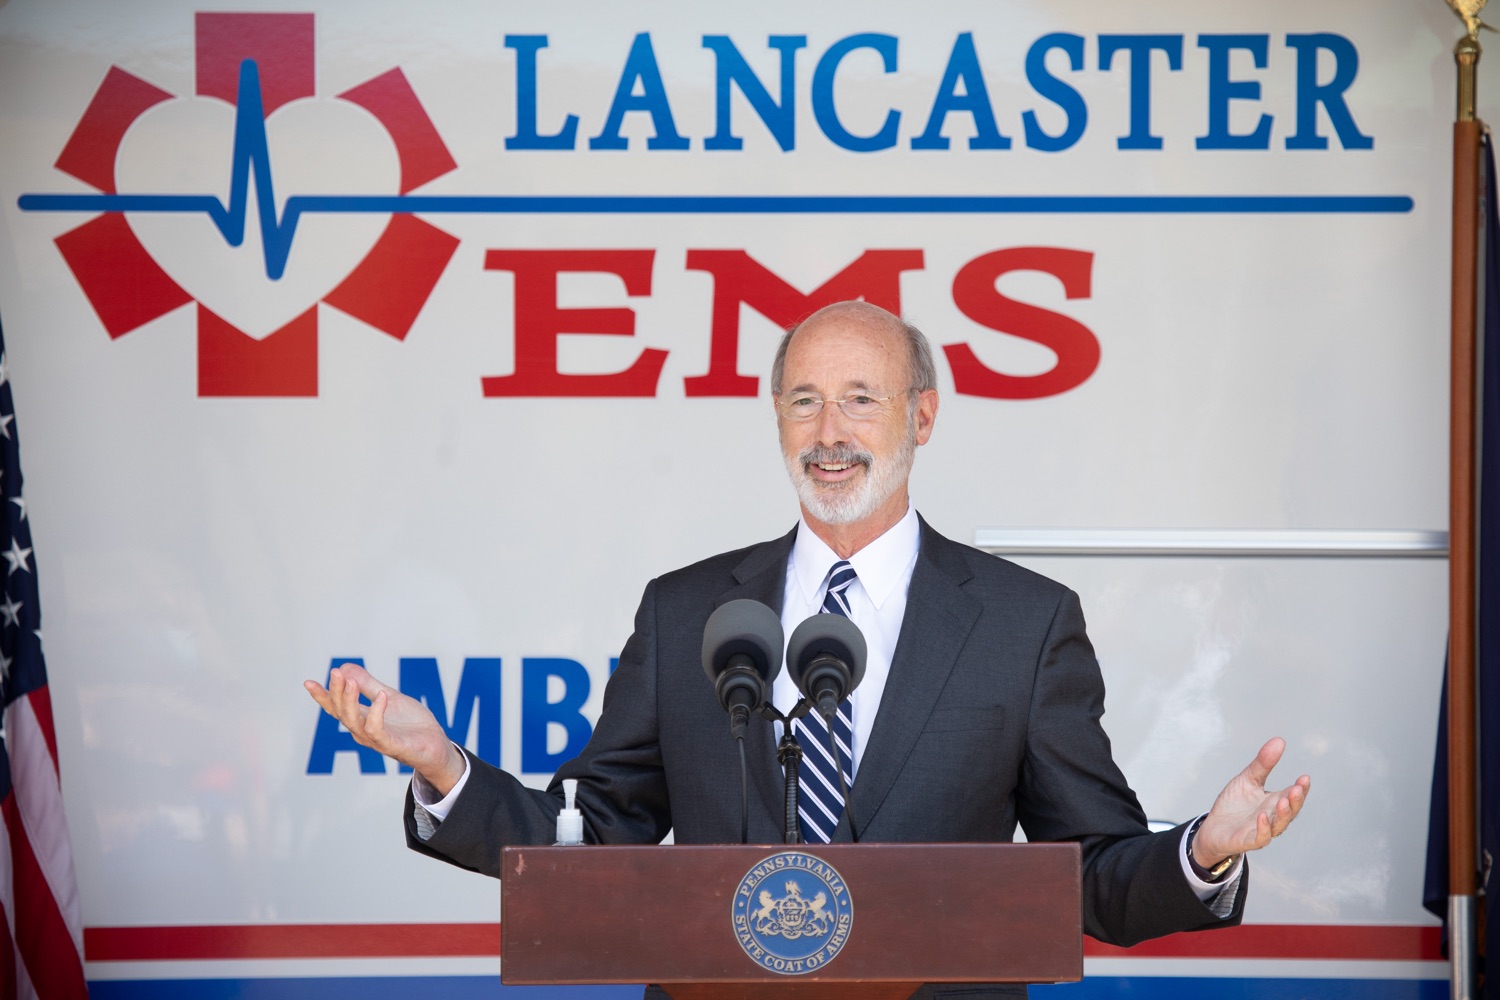 Pennsylvania Governor Tom Wolf speaking with Lancaster EMS employees and their families. Governor Tom Wolf visited the Millersville location of Lancaster EMS today to thank first responders and learn about how they are adapting their critical work during the states response to the COVID-19 pandemic.  Millersville, PA  July 30, 2020<br><a href="https://filesource.amperwave.net/commonwealthofpa/photo/18180_gov_first_responders_dz_015.jpg" target="_blank">⇣ Download Photo</a>